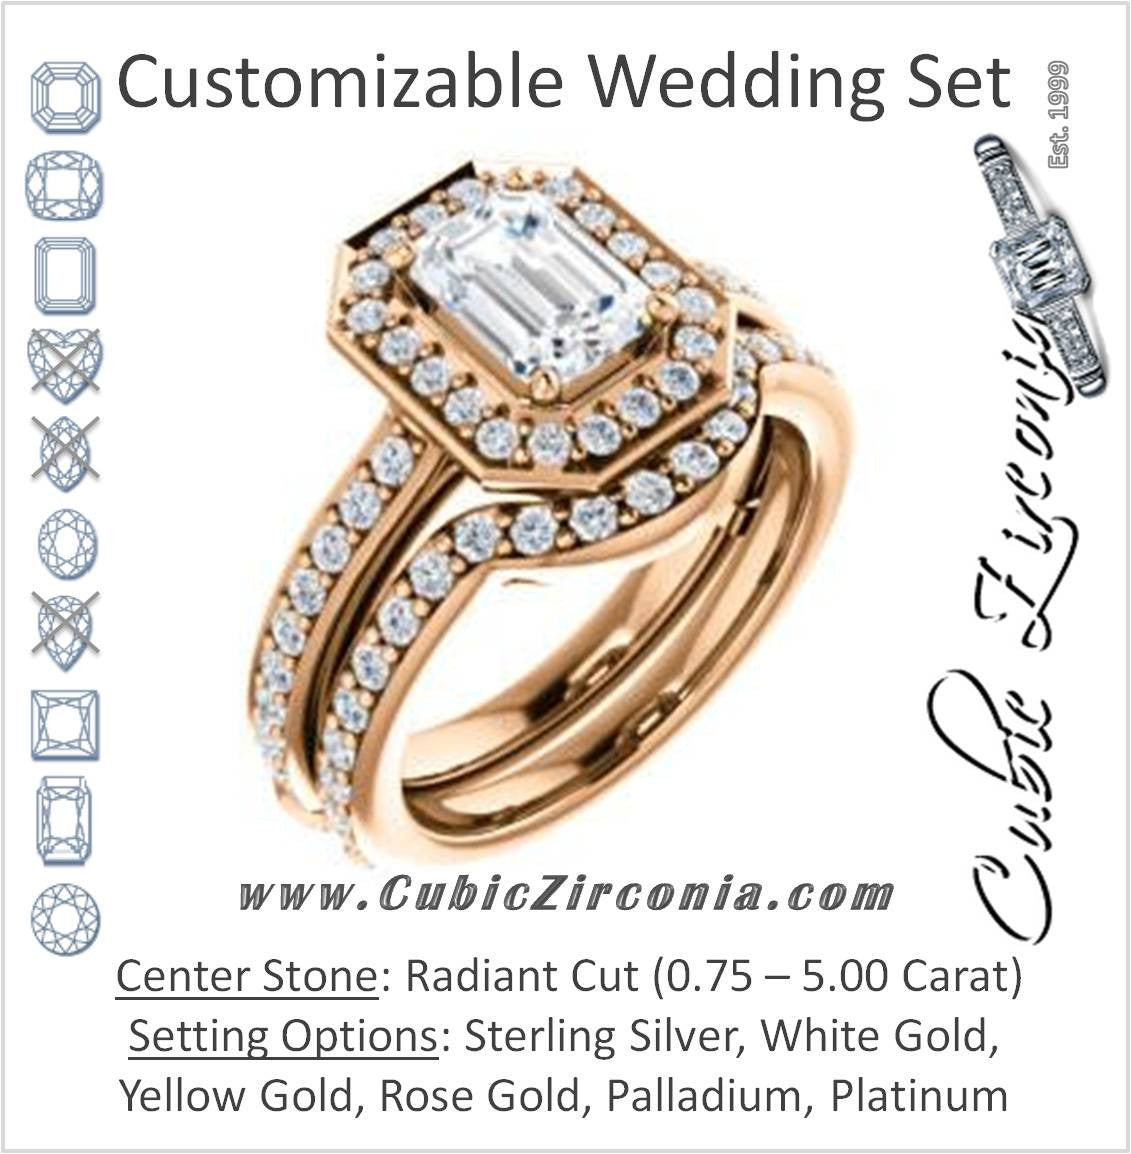 CZ Wedding Set, featuring The Sally engagement ring (Customizable Halo-Radiant Cut Design with Round Side Knuckle and Pavé Band Accents)